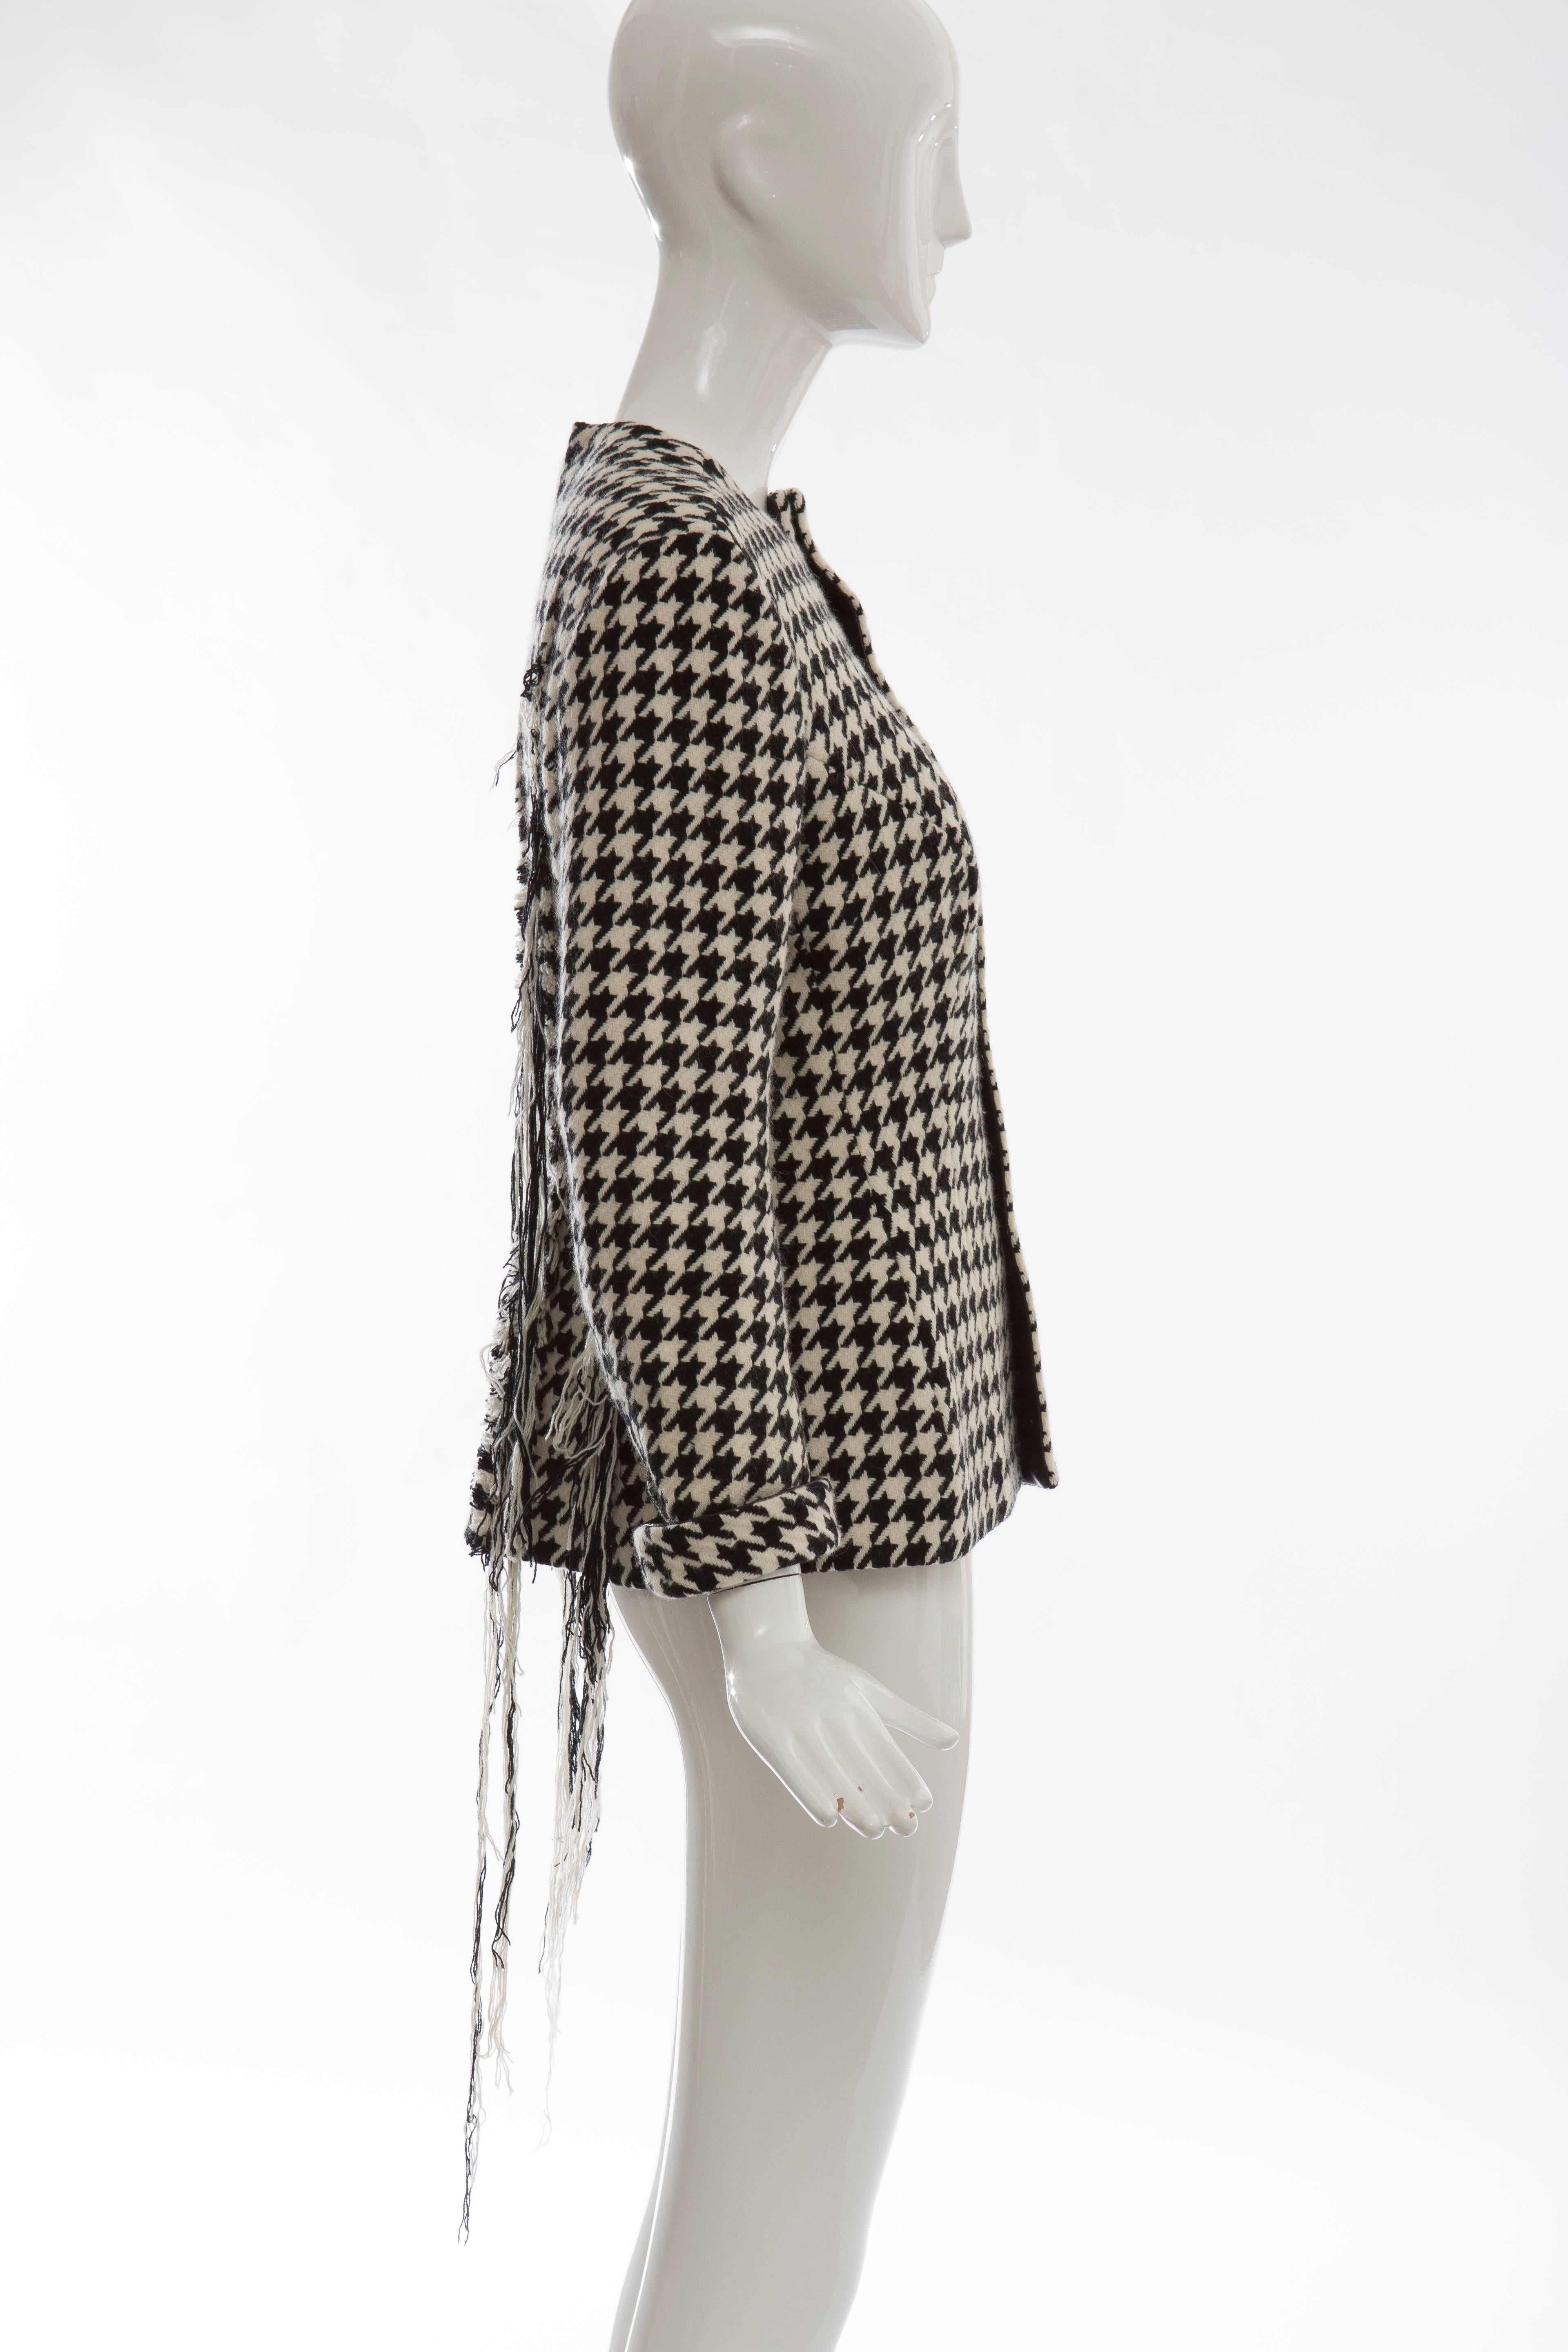 Black Yohji Yamamoto Wool Houndstooth Jacket With Leather Trim, Autumn / Winter 2003 For Sale